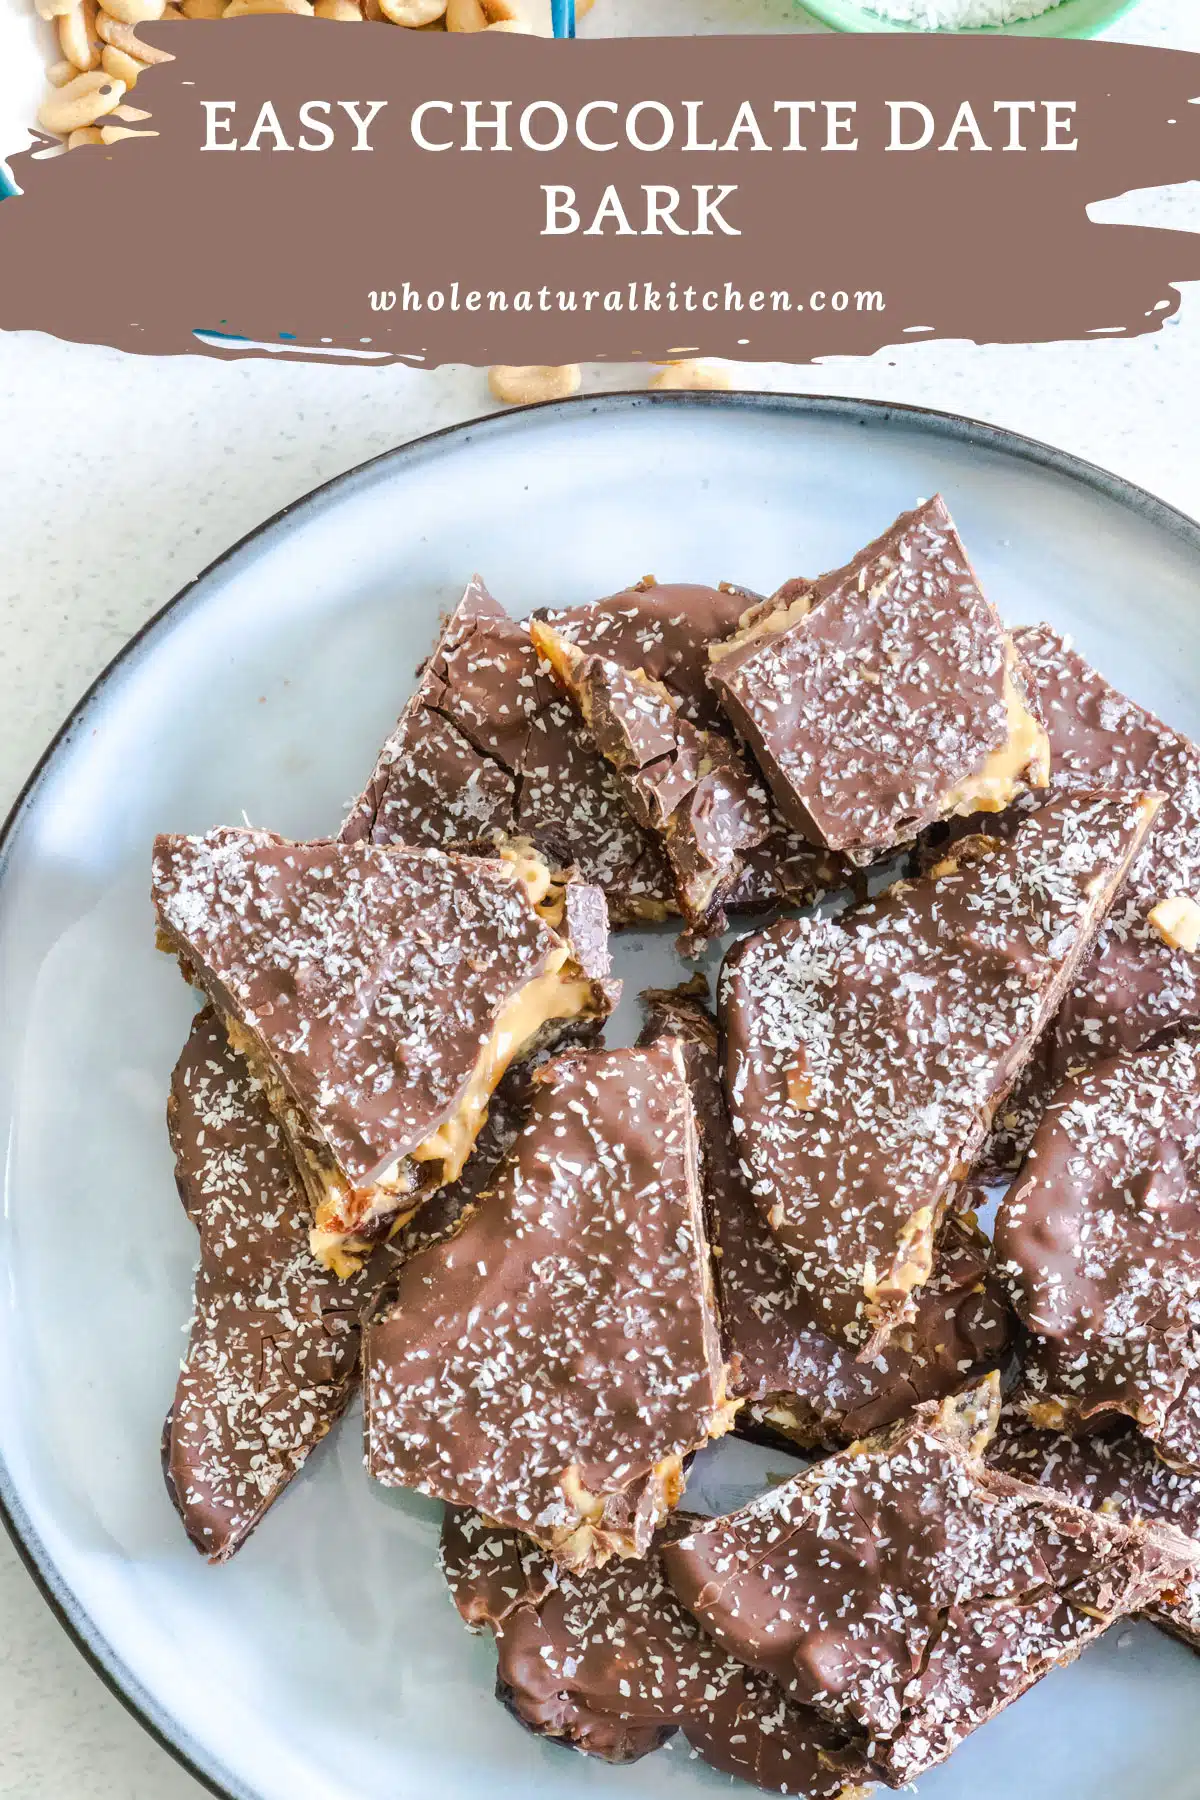 A Pinterest poster image showing the name of the recipe and the website up the top. Below is a blue plate filled with cut pieces of chocolate date bark.